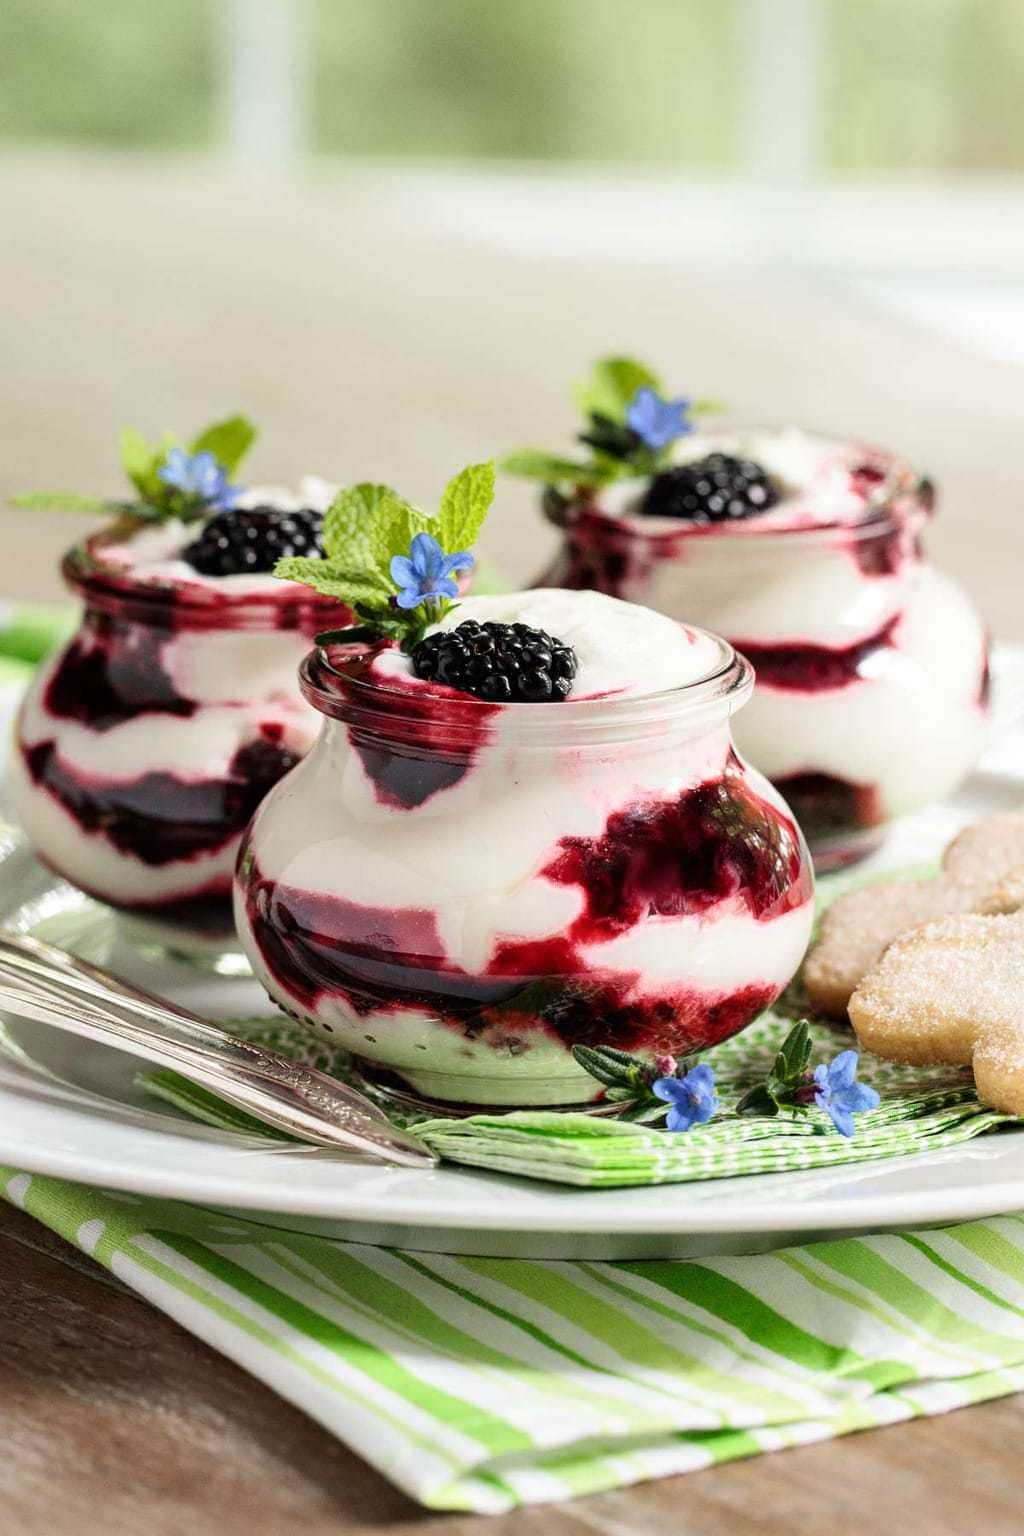 Vertical closeup photo of an Easy Irish Blackberry Fool in small glass Weck jars garnished with mint leaves, fresh blackberries and small blue flowers.